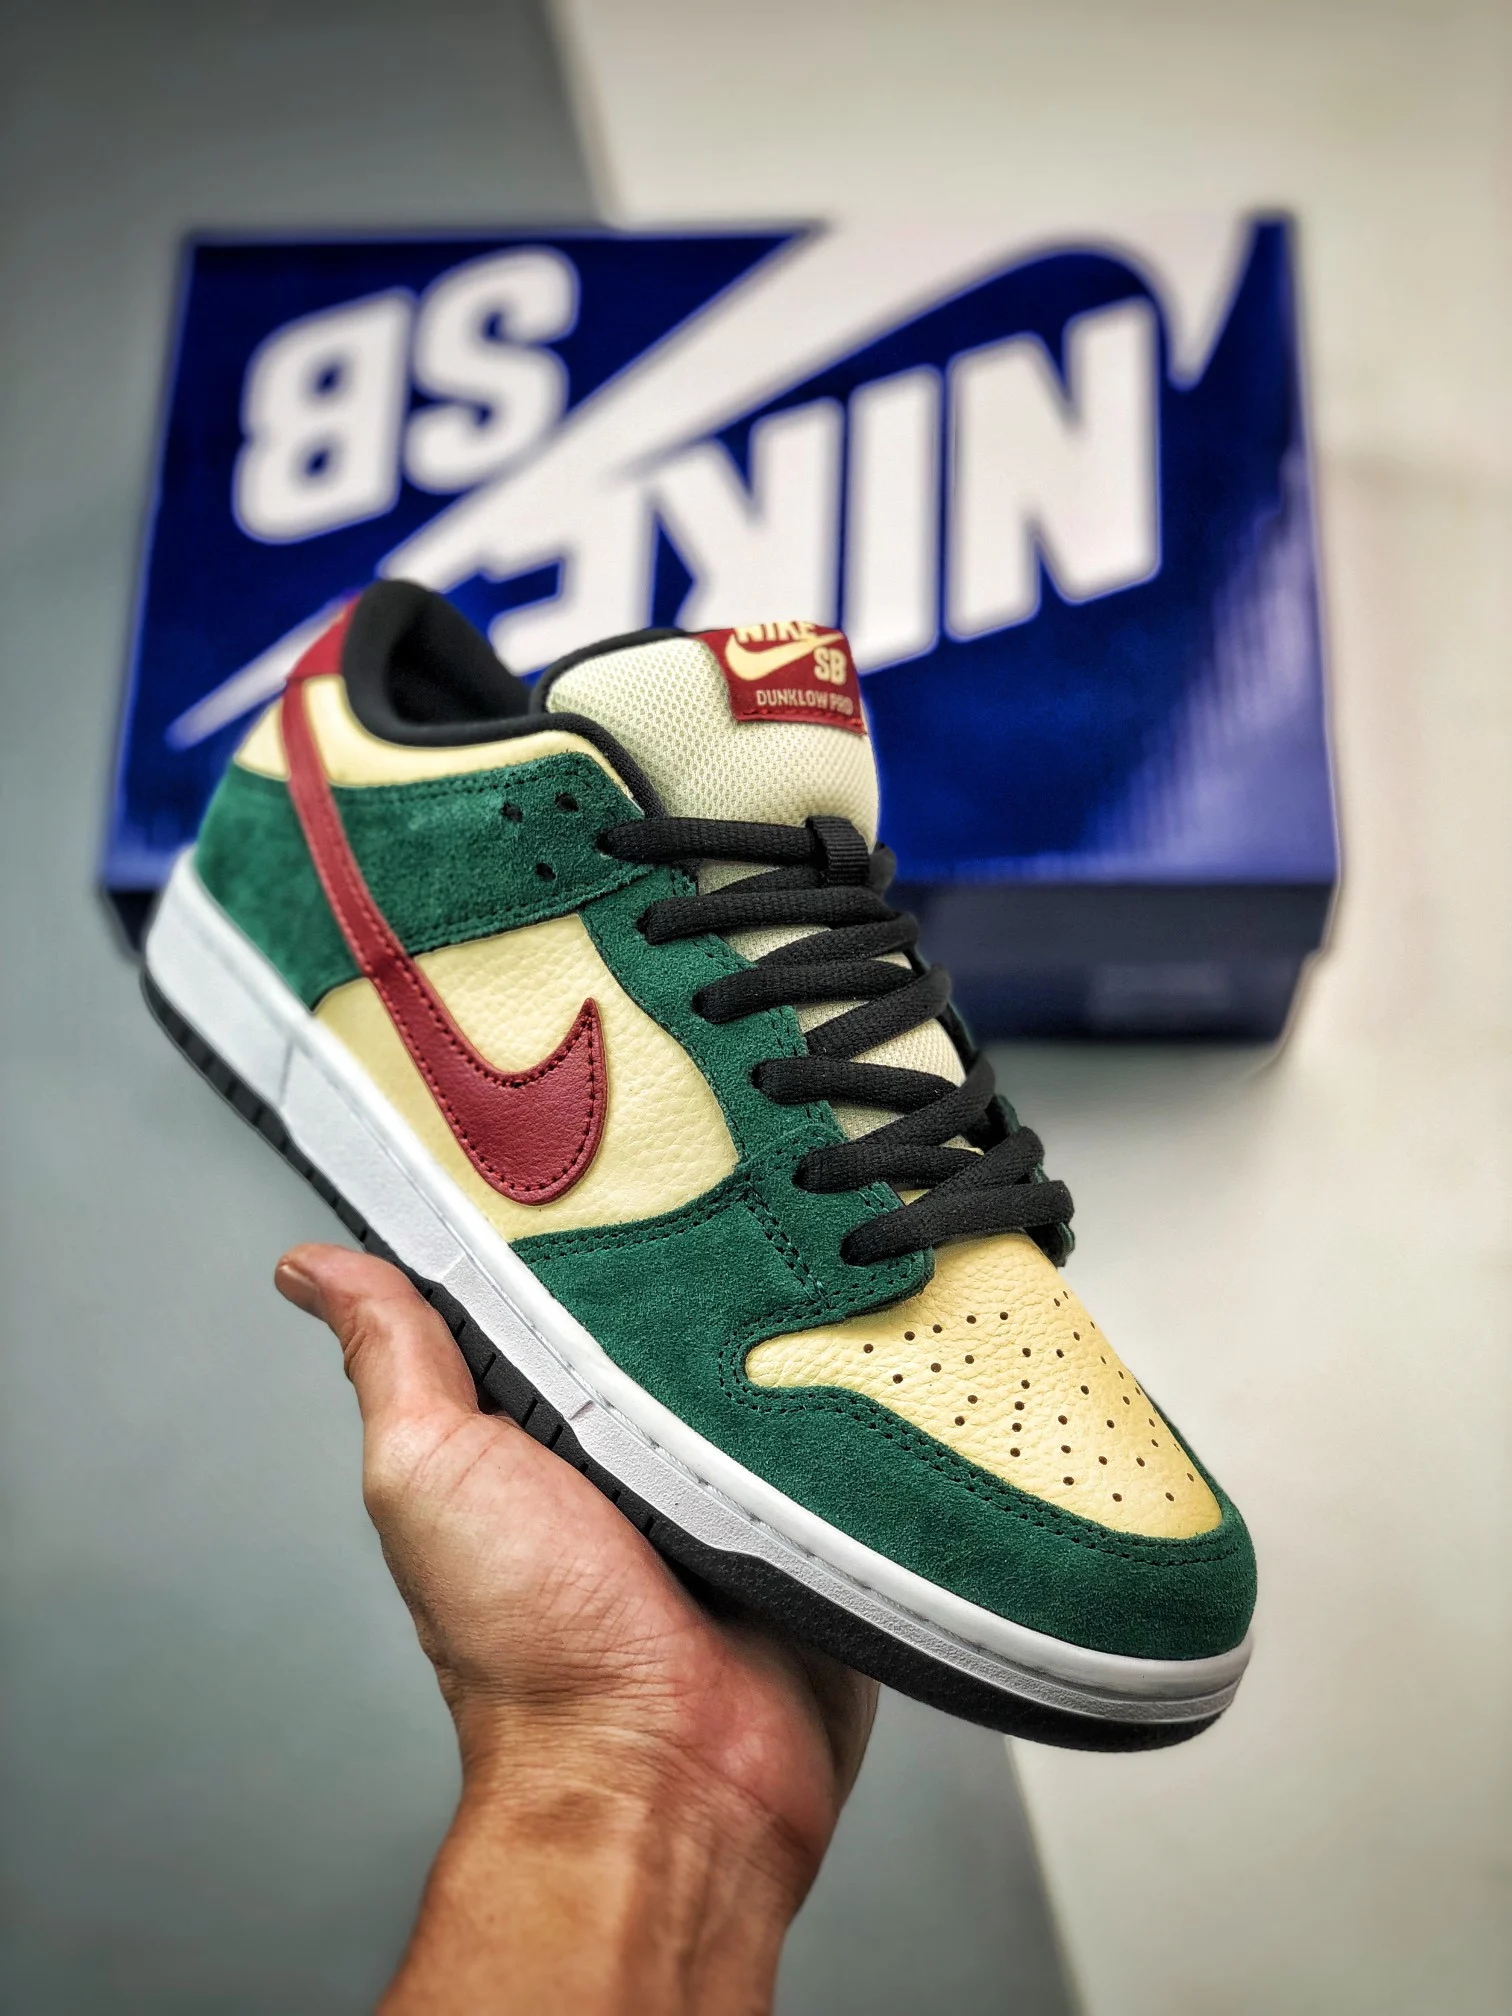 Nike SB Dunk Low Vegas Gold Team Red-Team Green 304292-700 For Sale